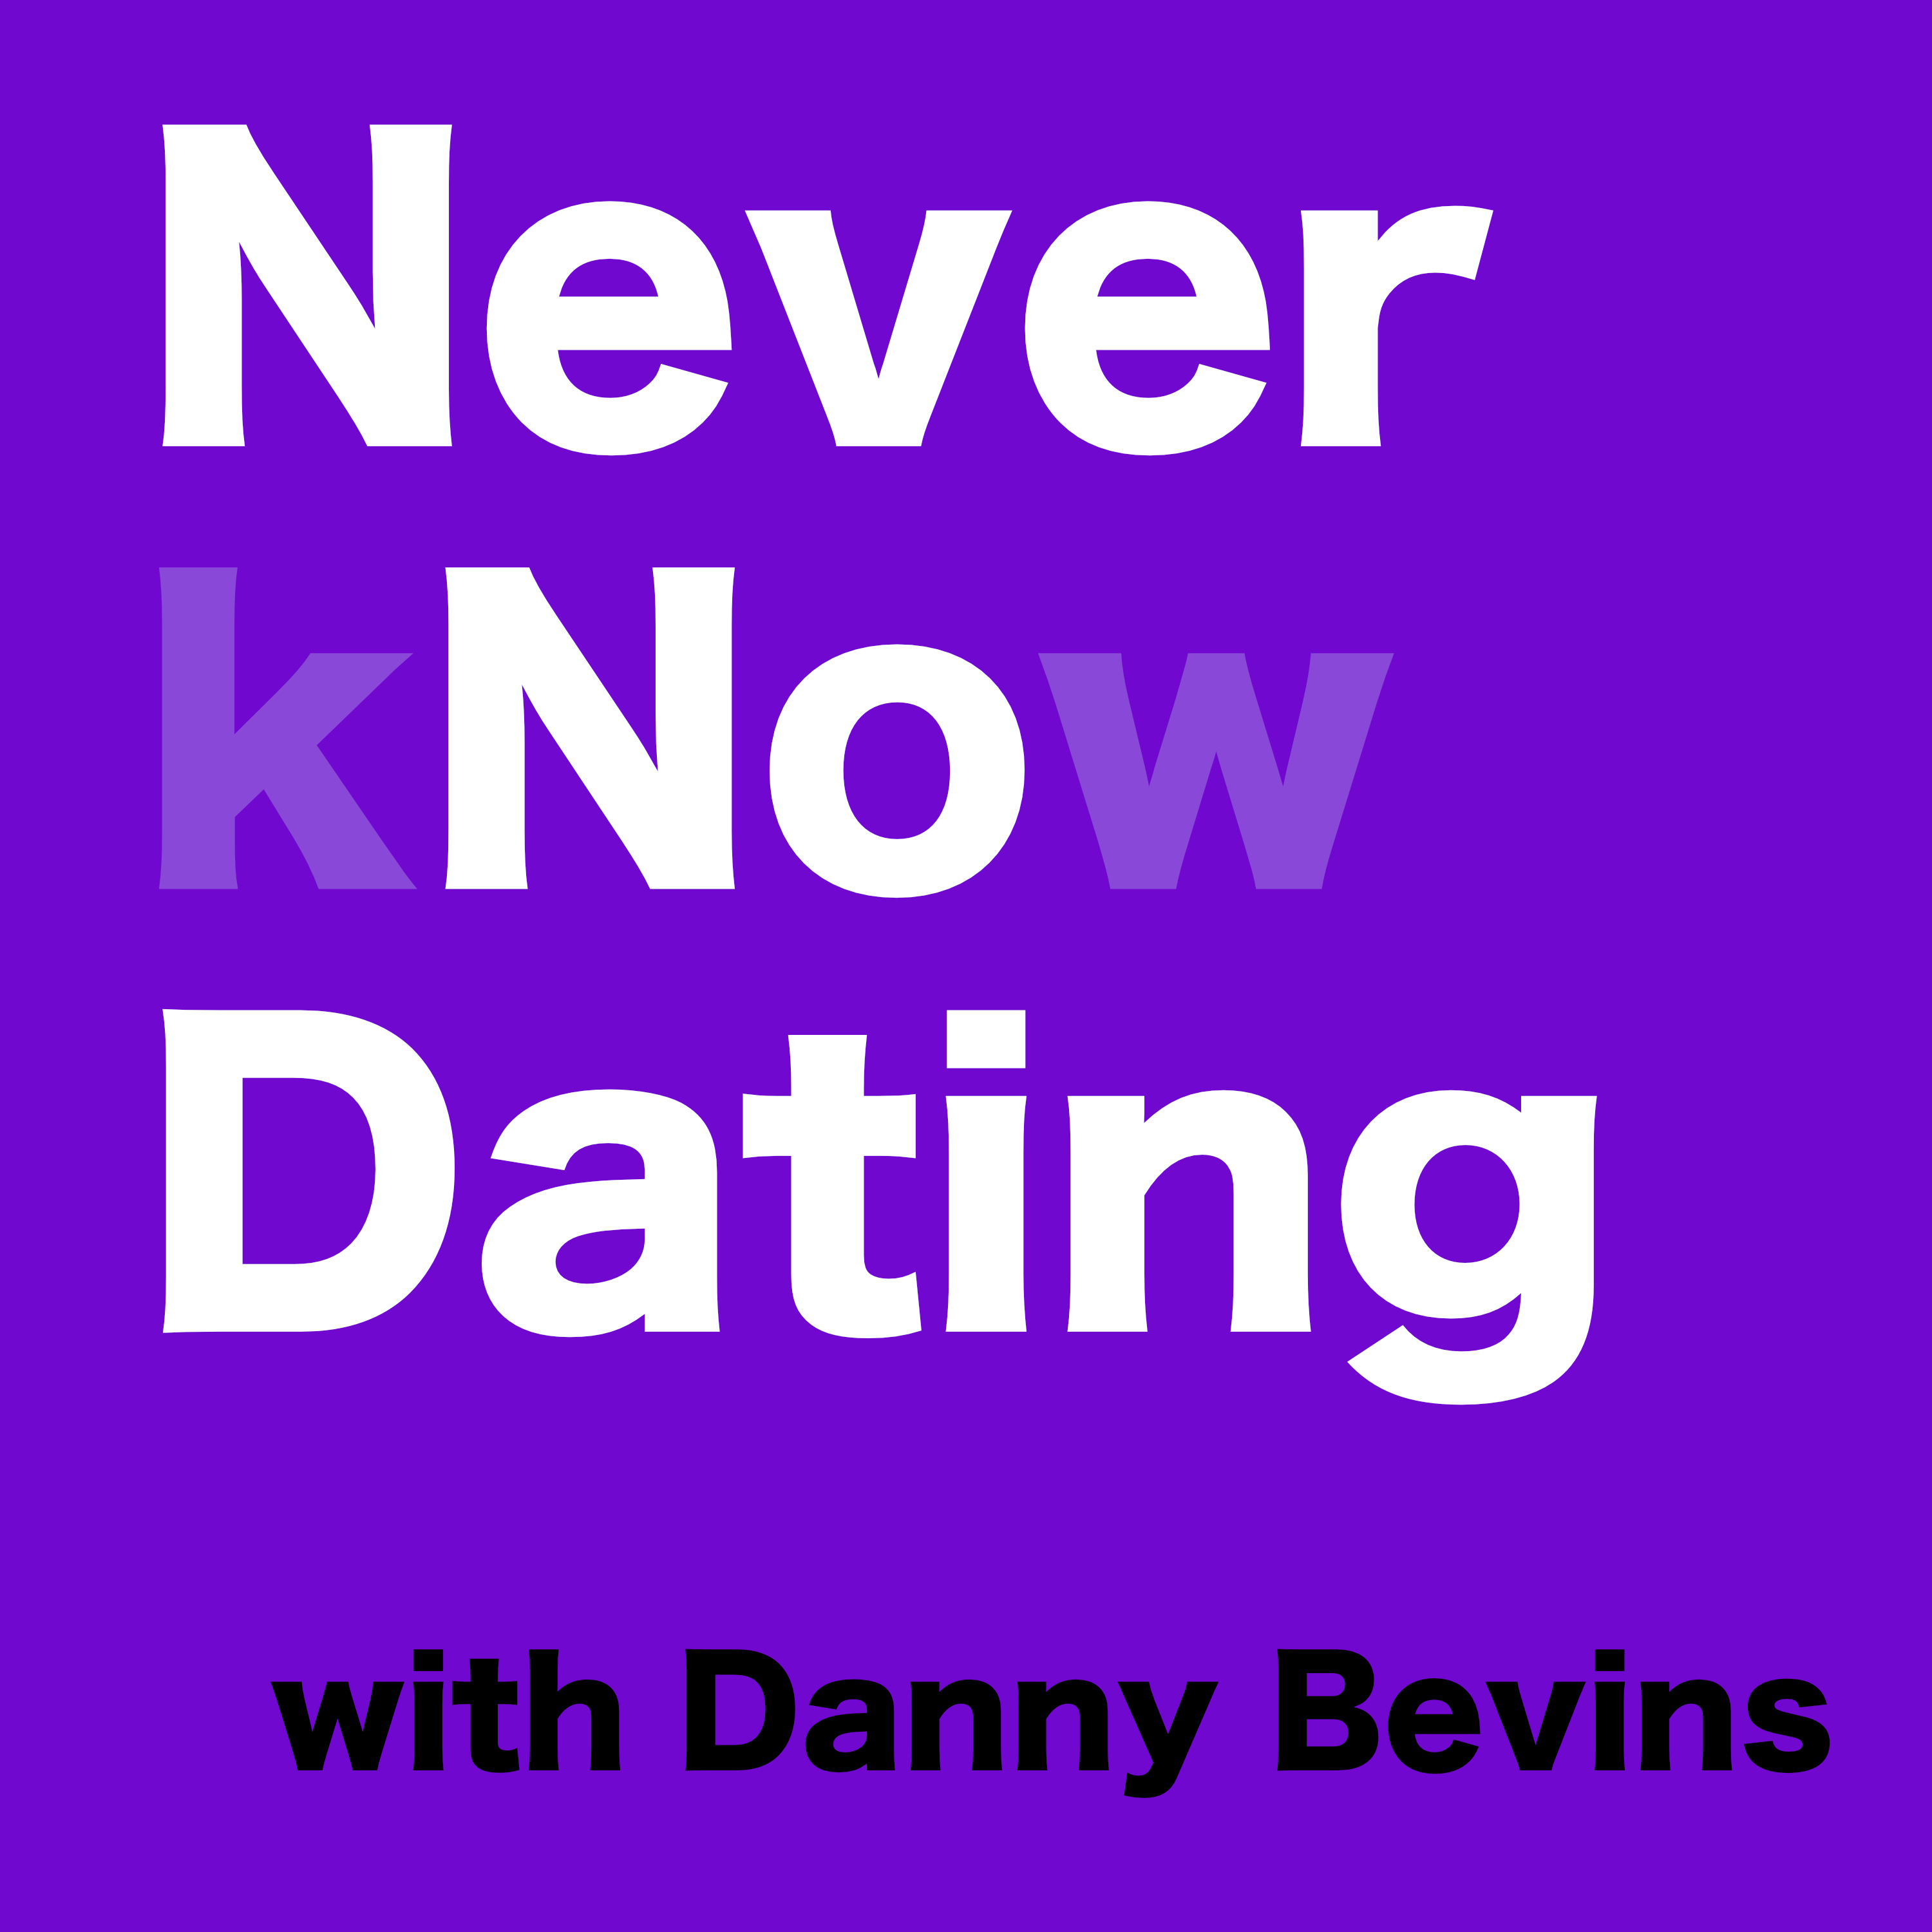 Artwork for Never kNow Dating with Danny Bevins